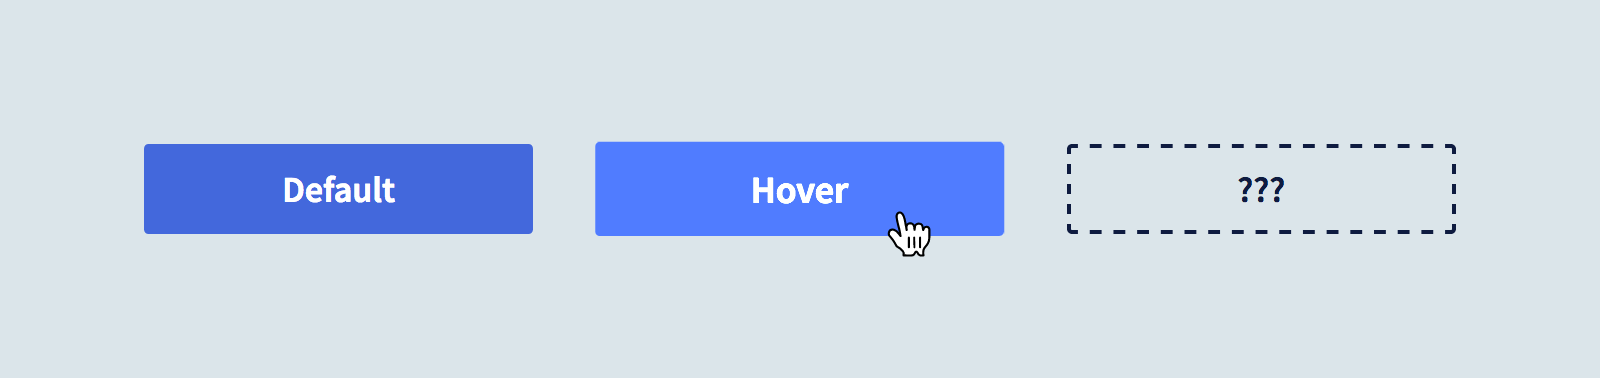 Mockup of a default button, a button with a hover effect, and a mystery button state